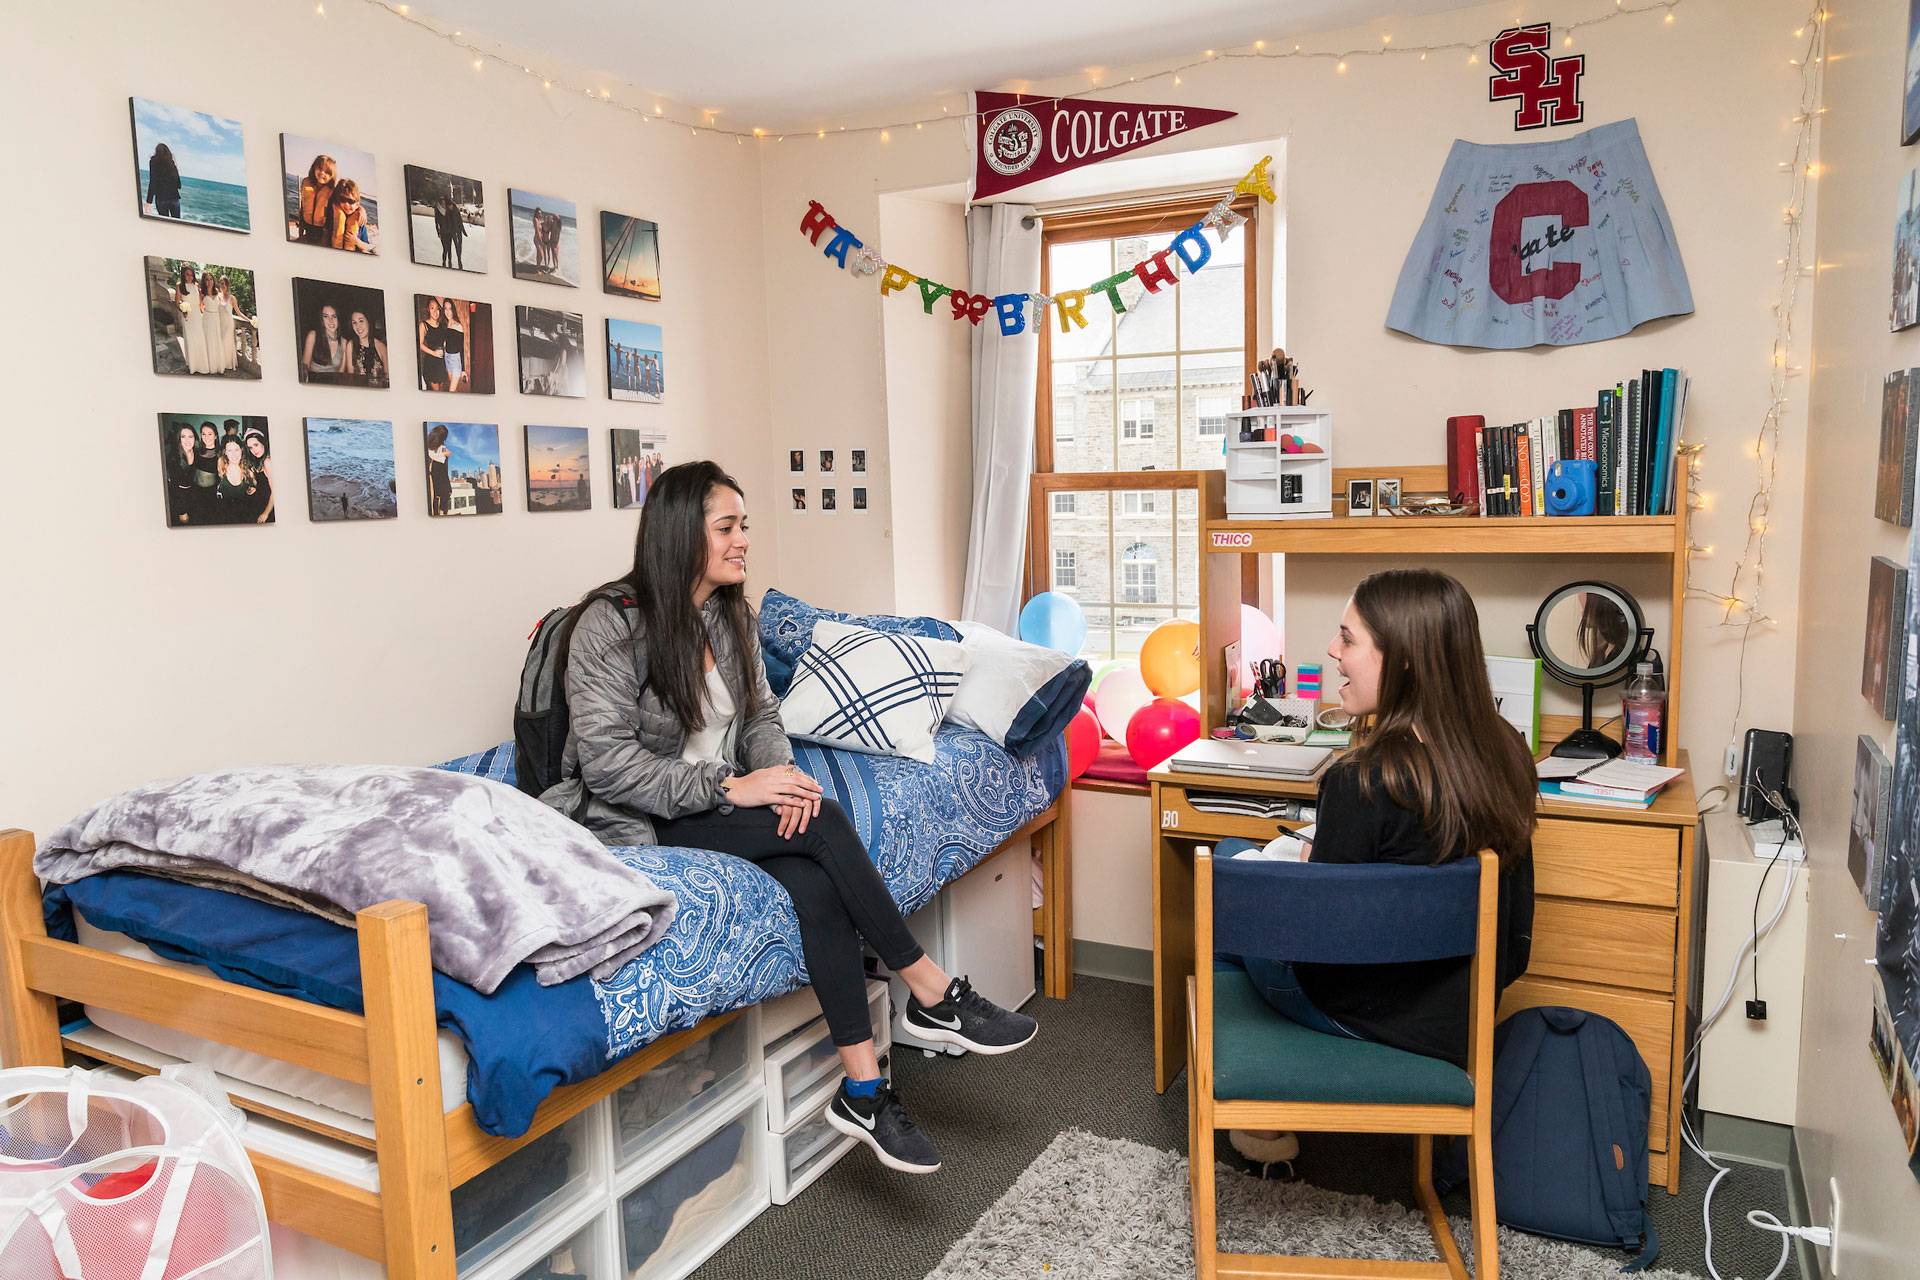 Two women, both with long, dark hair, socialize in a West Hall room. One sits on the bed, the other in a chair at the desk next to the bed. The walls are decorated with a Colgate pennant, Happy Birthday banner, and a grid of personal photos.